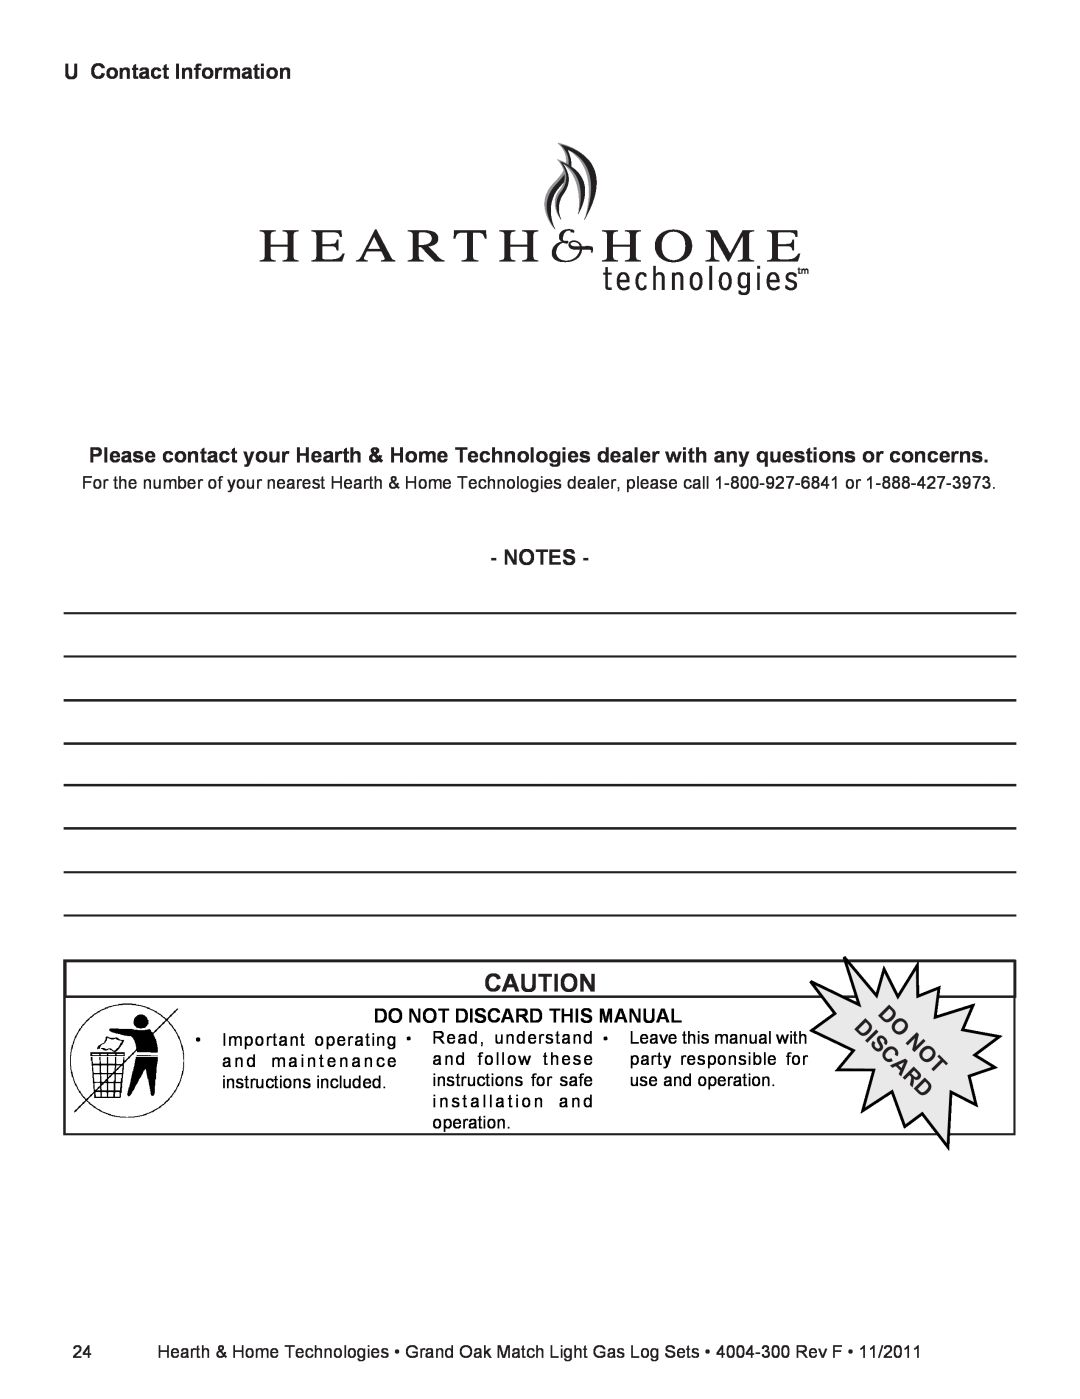 Hearth and Home Technologies GO318MTCH, GO324MTCH, GO330MTCH U Contact Information, Do Not Discard This Manual 